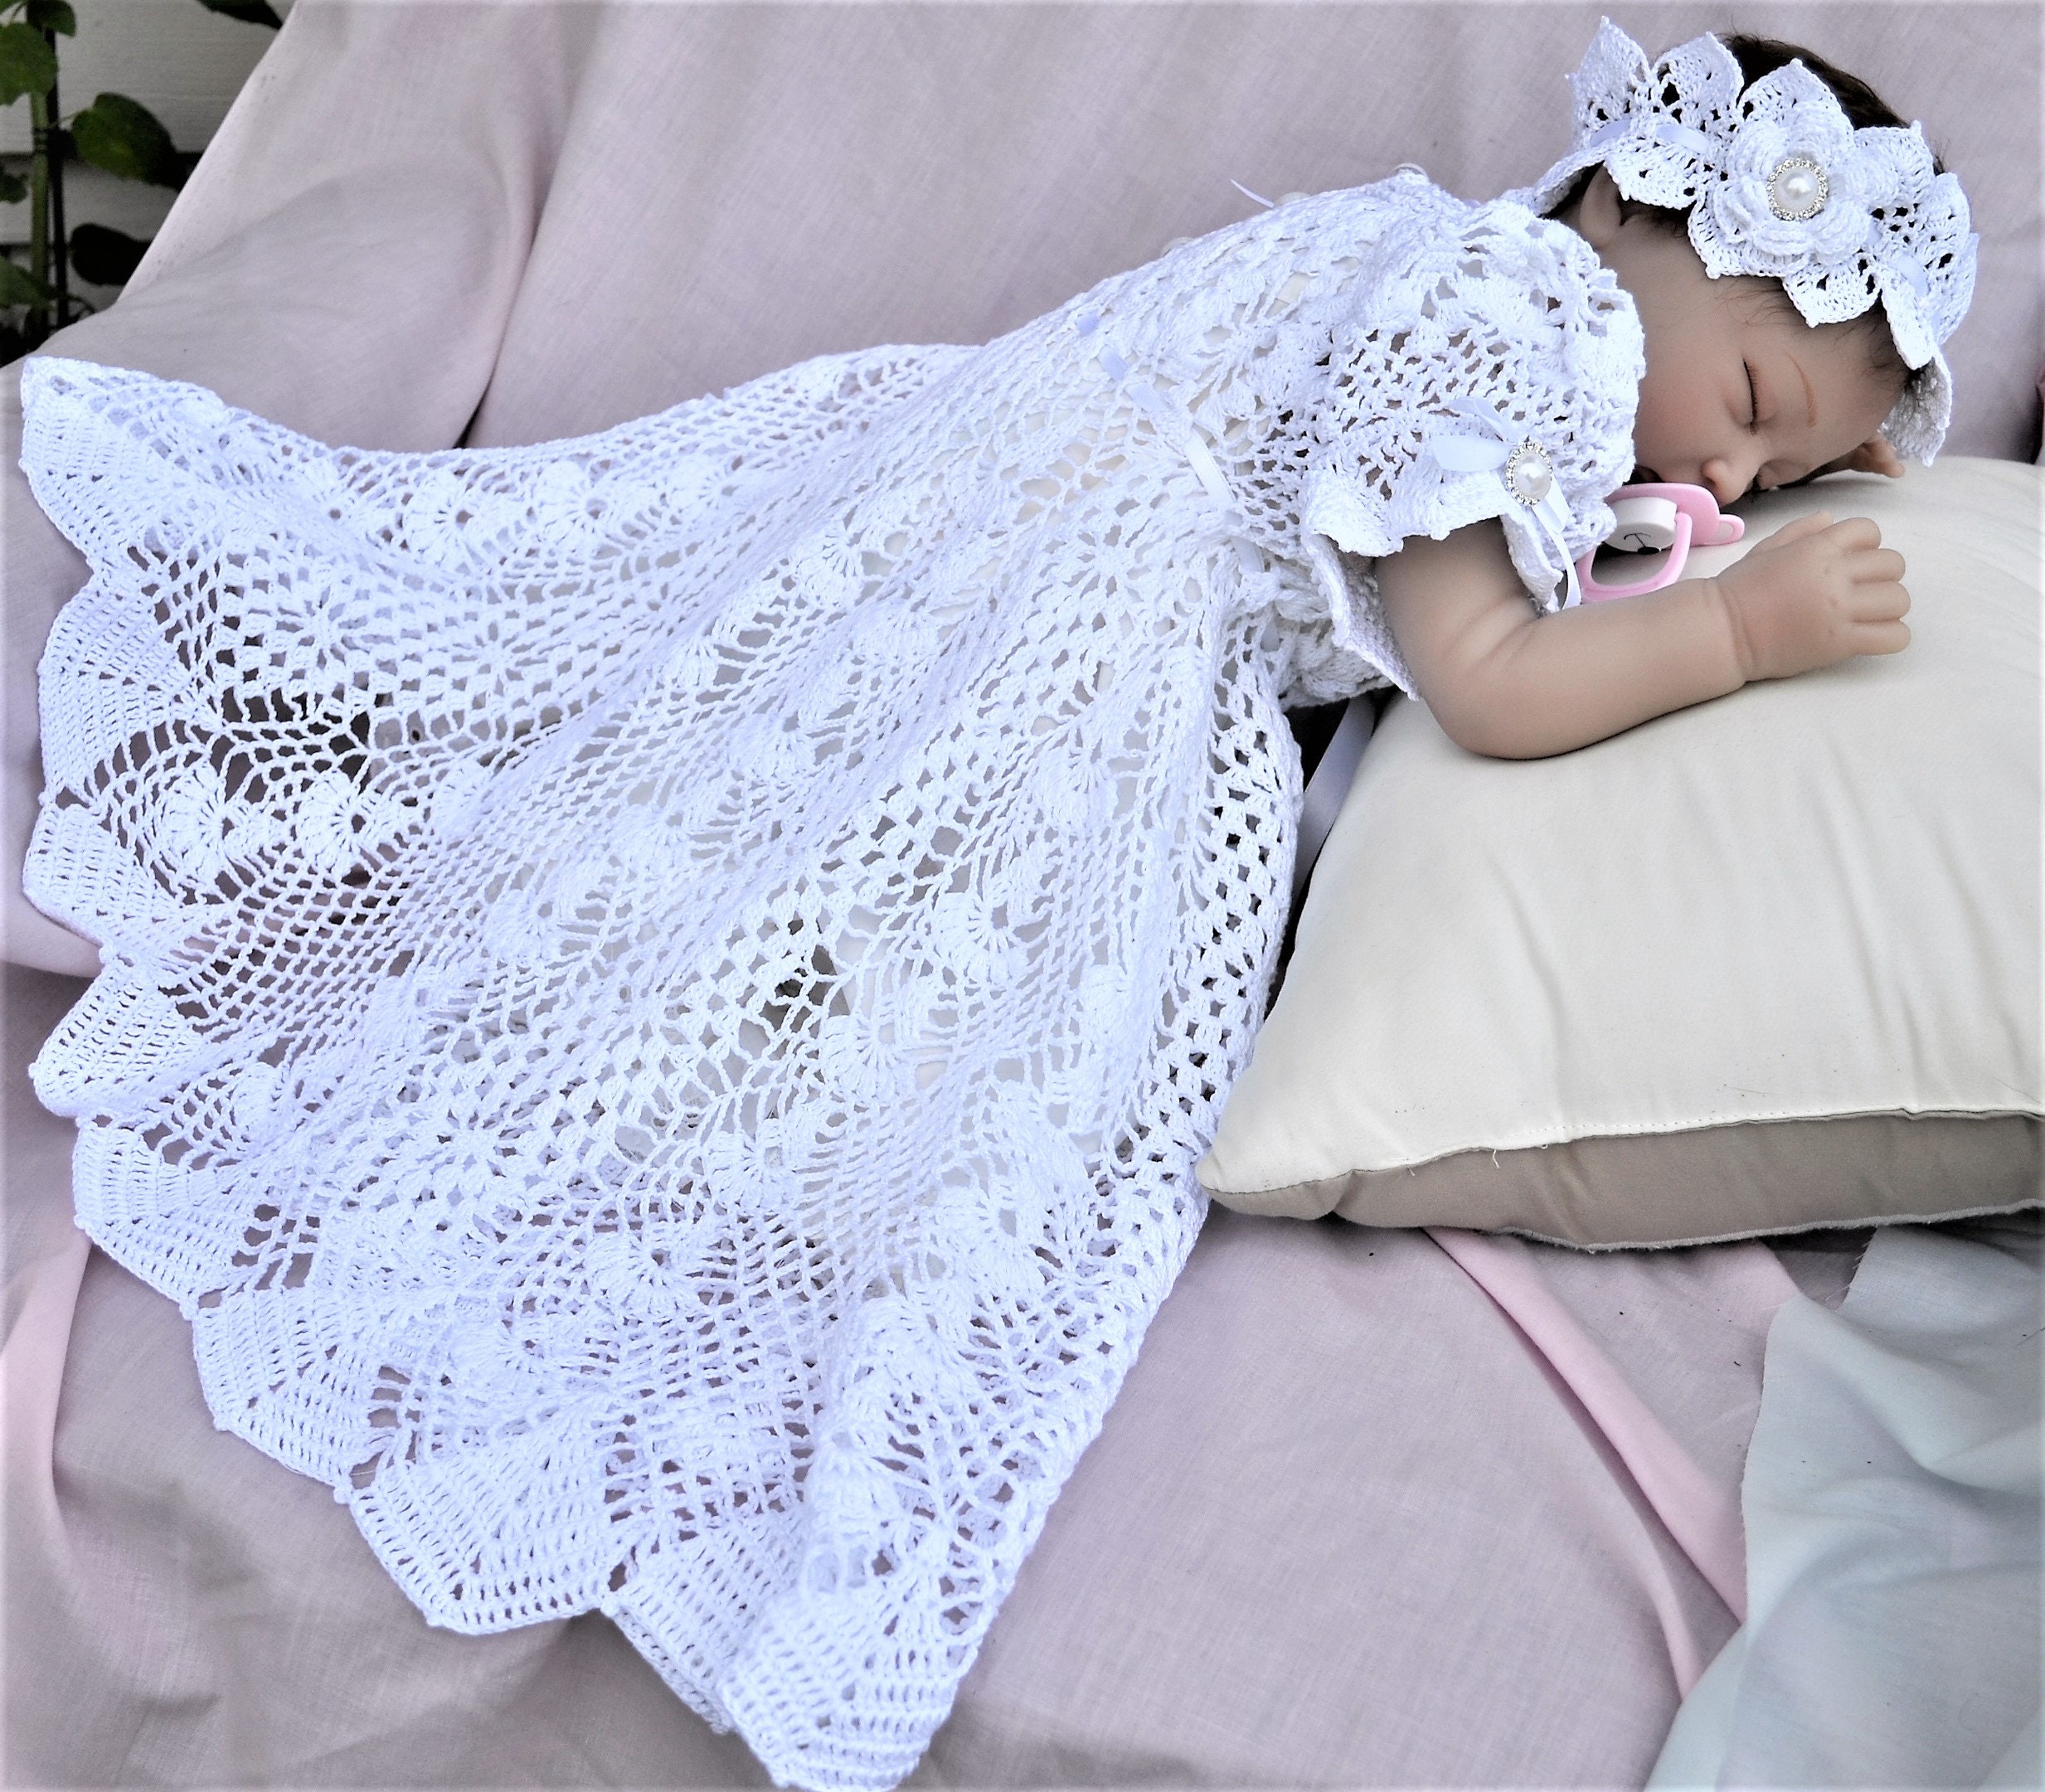 Baptism and Christening Gowns-Free Patterns - Nana's Favorites